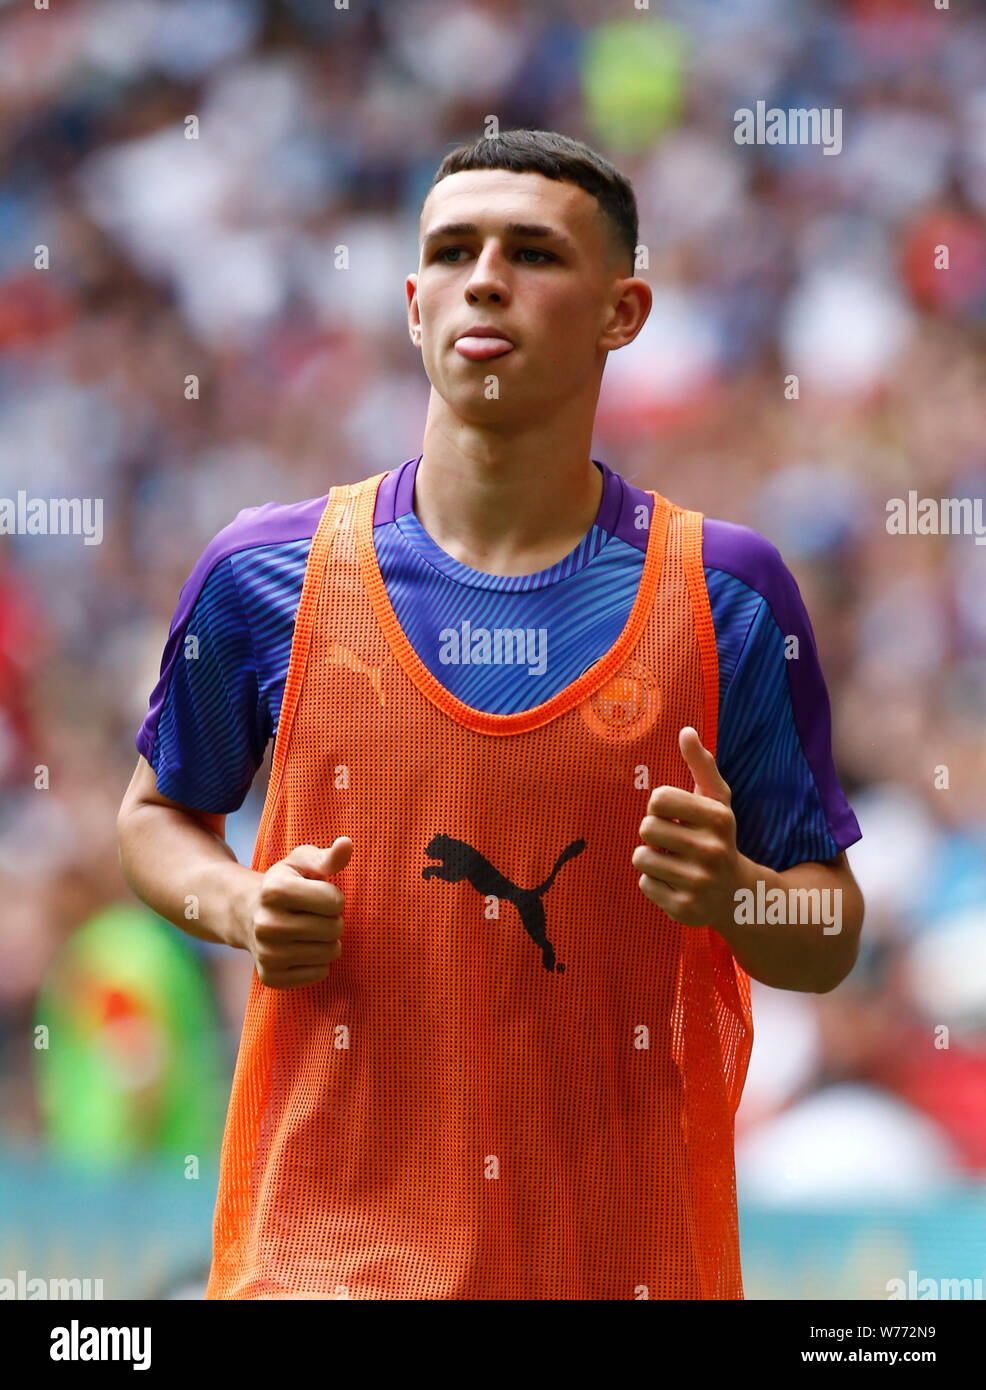 London, UK. 04th Aug, 2019. LONDON, ENGLAND. AUGUST 04: Manchester City's Phil Foden during The FA Community Shield between Liverpool and Manchester City at Wembley Stadium on August 04, 2019 in London, England. Credit: Action Foto Sport/Alamy Live News Stock Photo